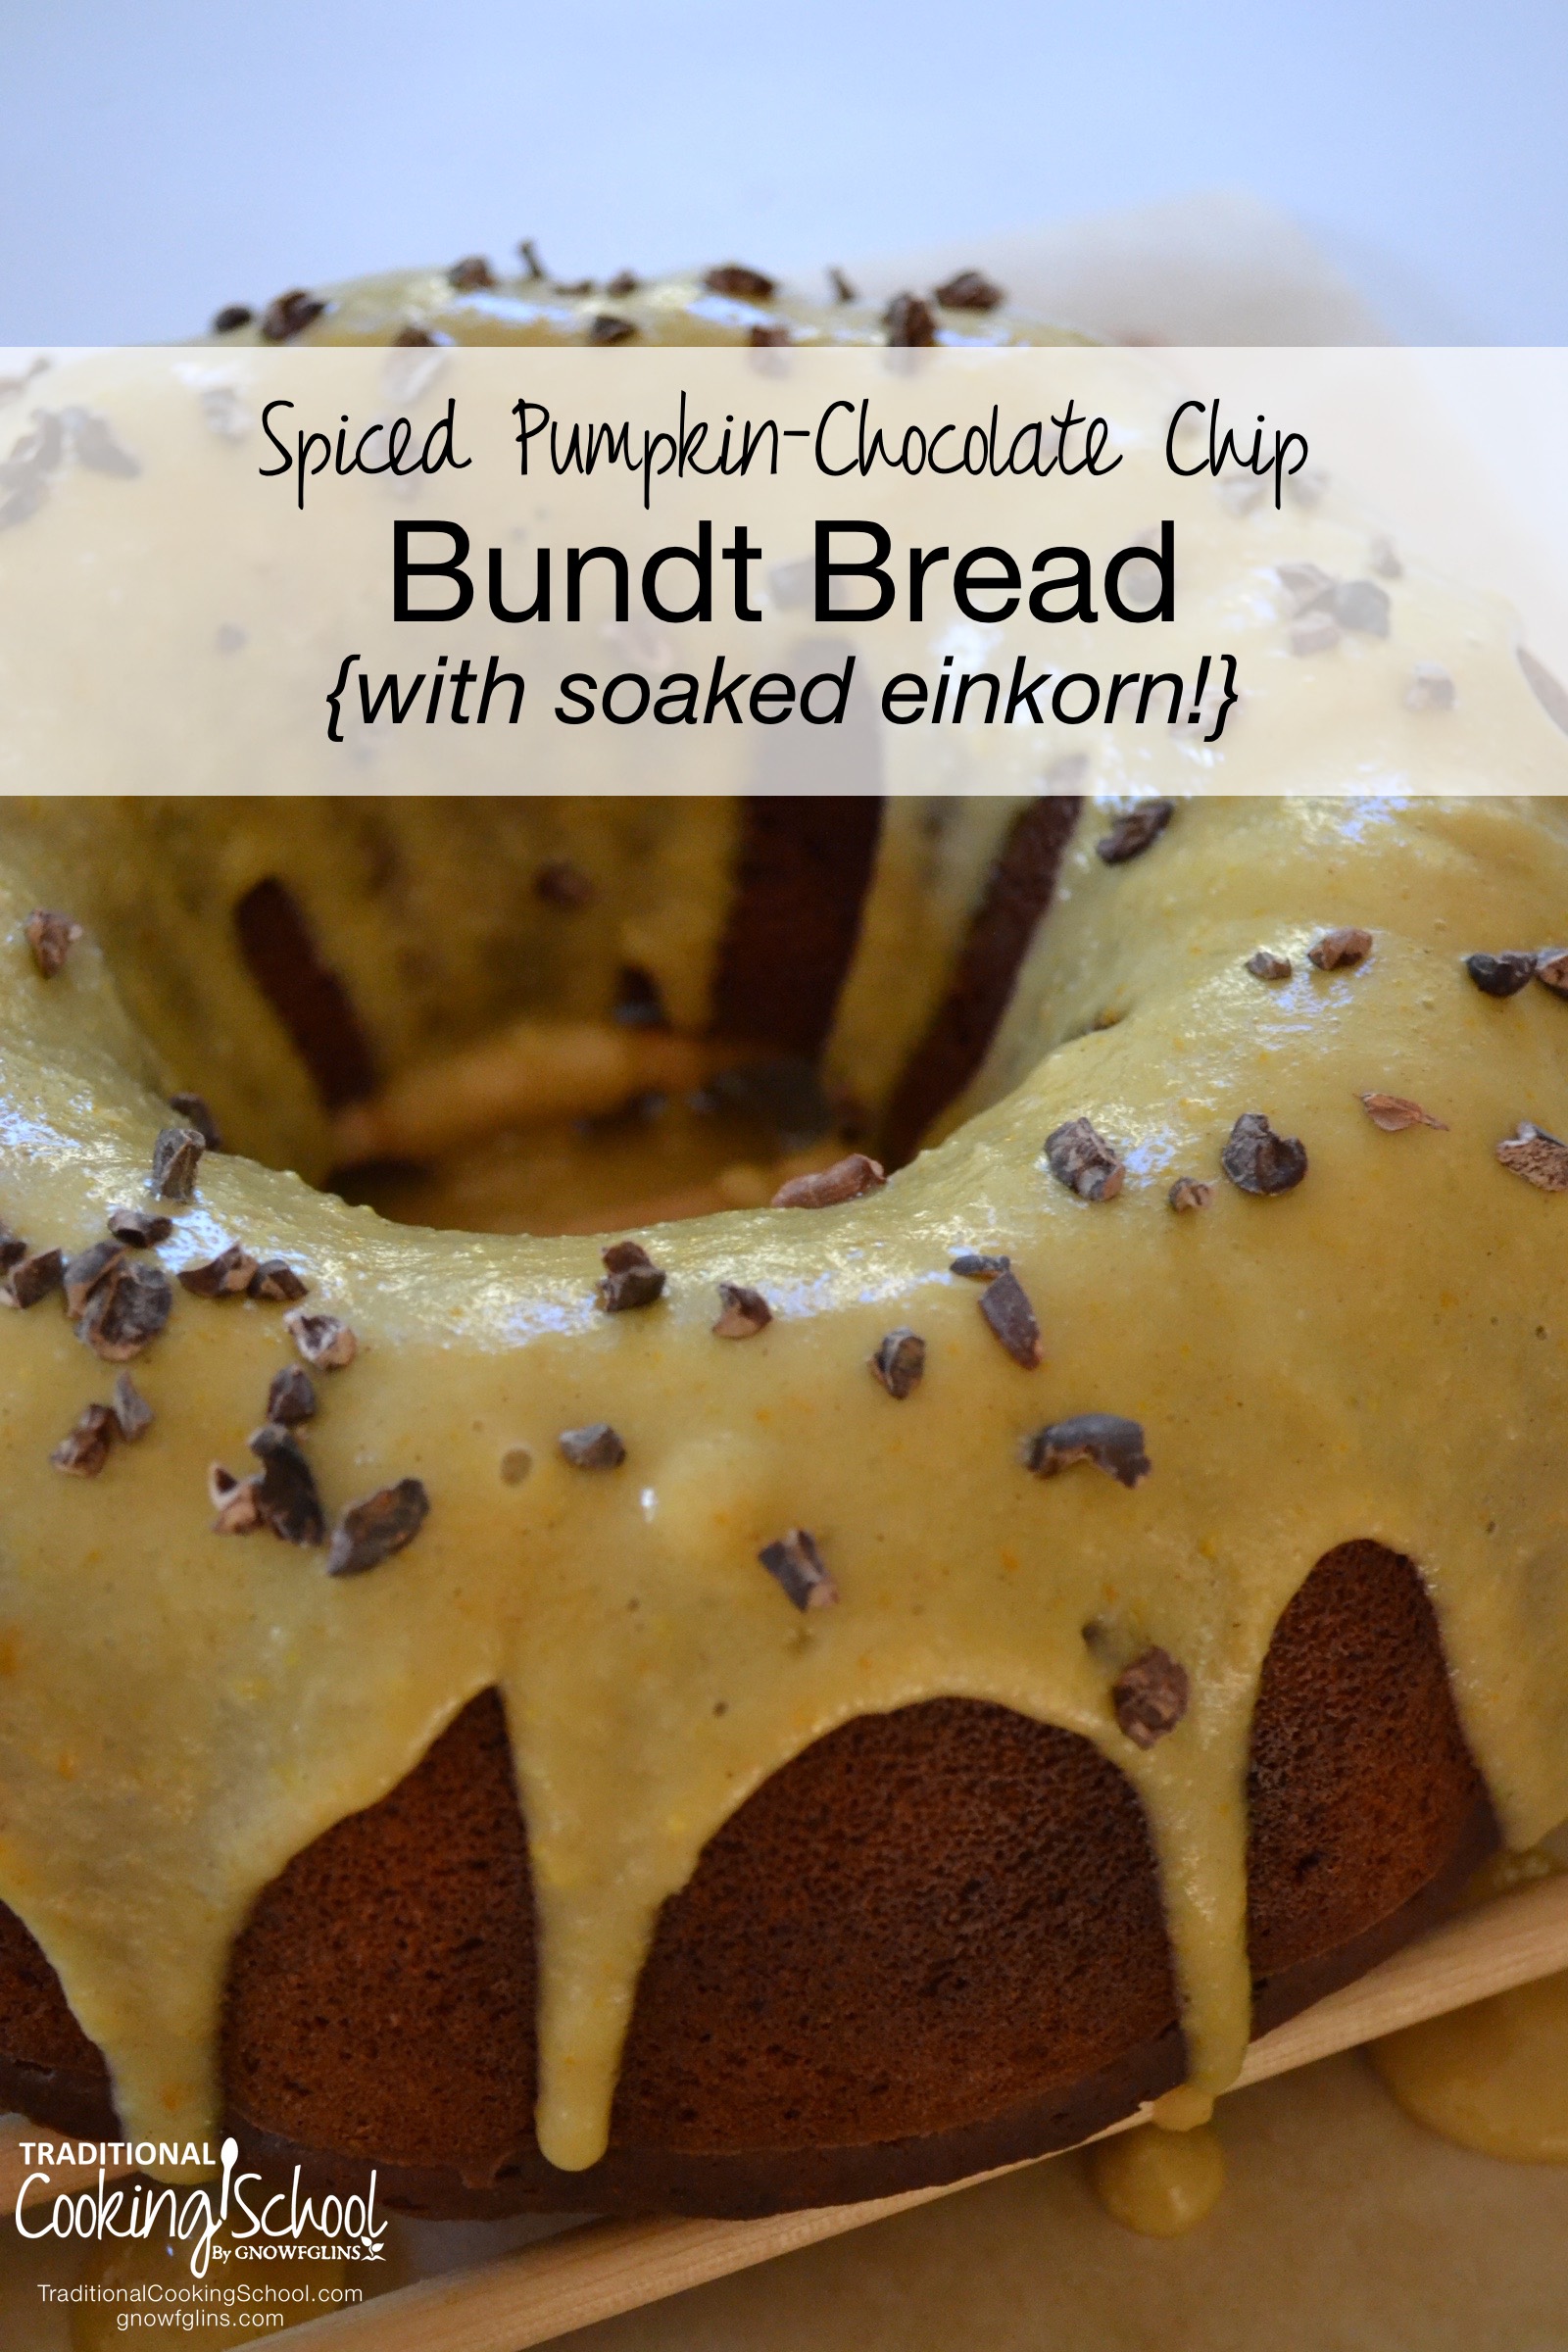 Spiced Pumpkin-Chocolate Chip Bundt Bread {with soaked einkorn} | Is it a cake or a quick bread? It really doesn't matter what you call it because ... pumpkin! It's really not a cake, but if you want to serve it for dessert, I promise no one will know the difference. It's time to bake something pumpkin in a Traditional way with soaked einkorn! | TraditionalCookingSchool.com